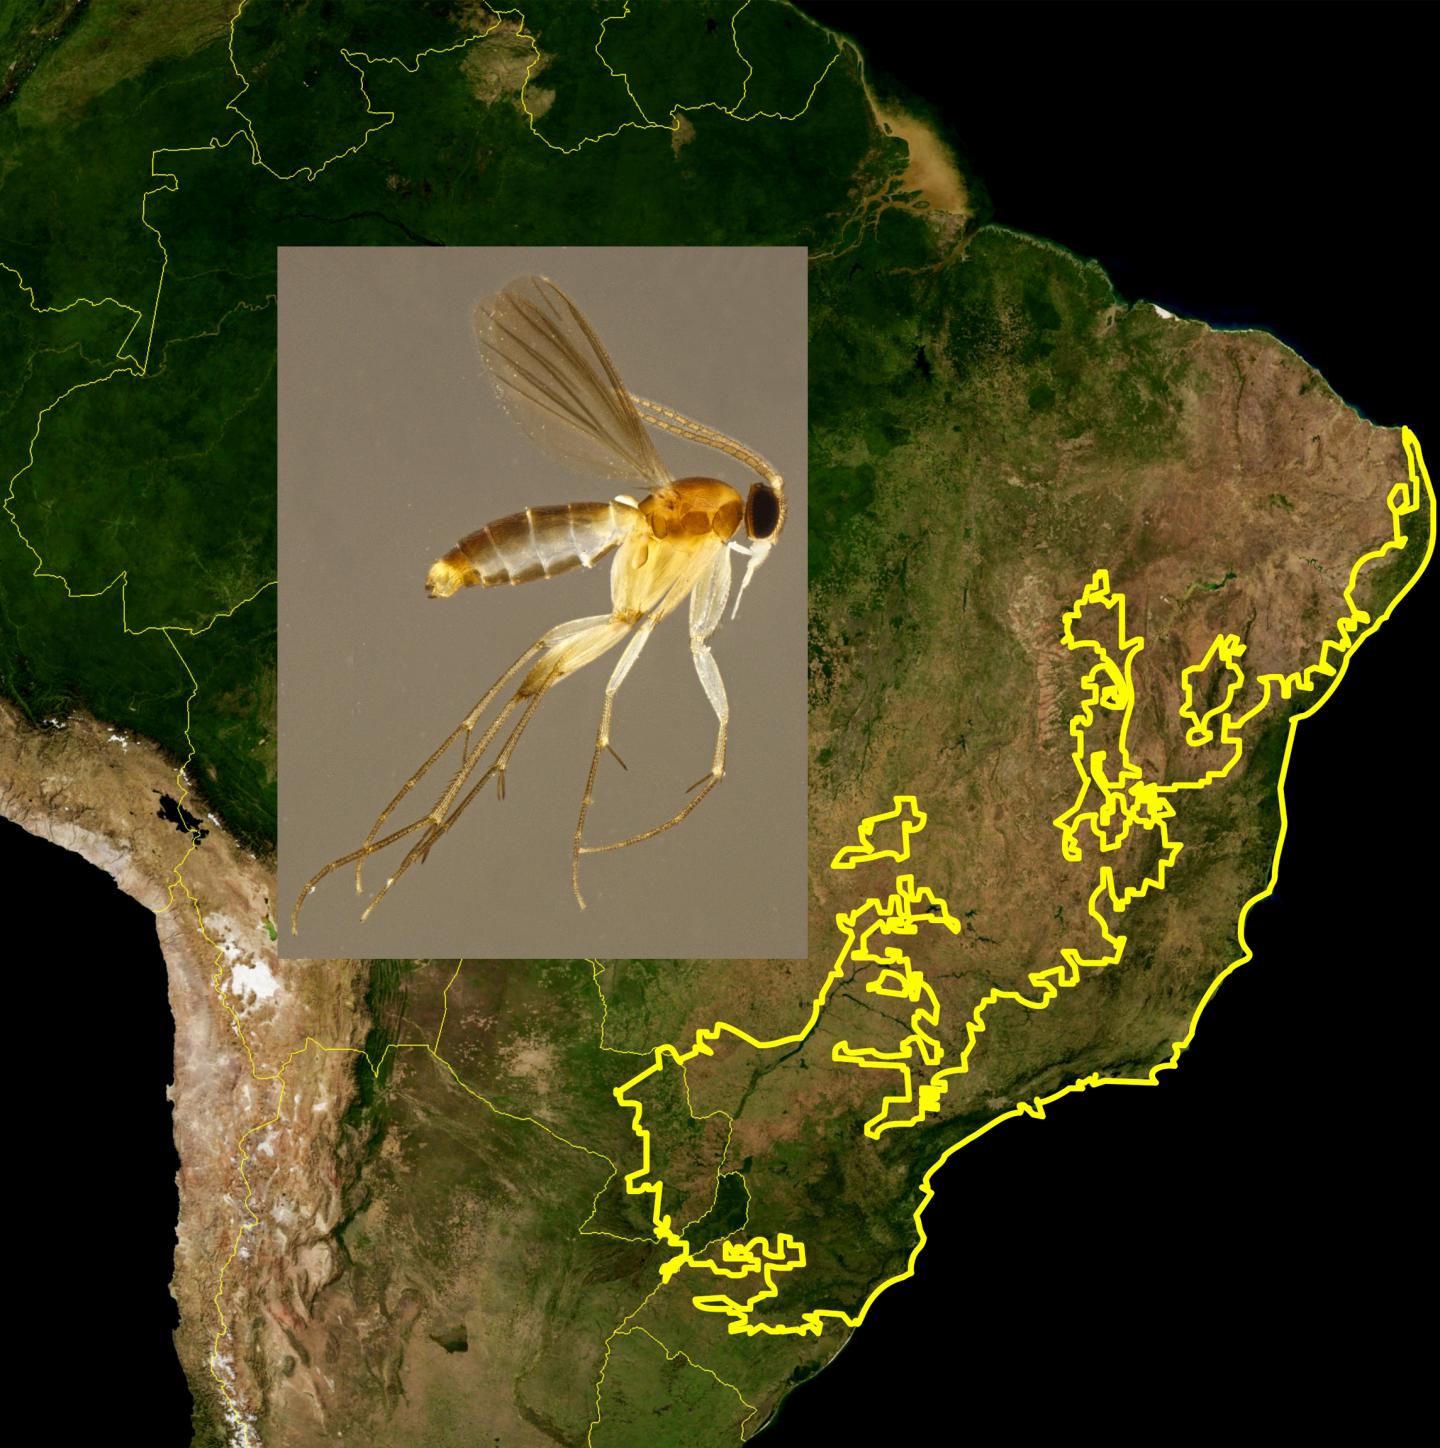 The Atlantic Forest Ecoregion in Brazil Where New Species Were Found